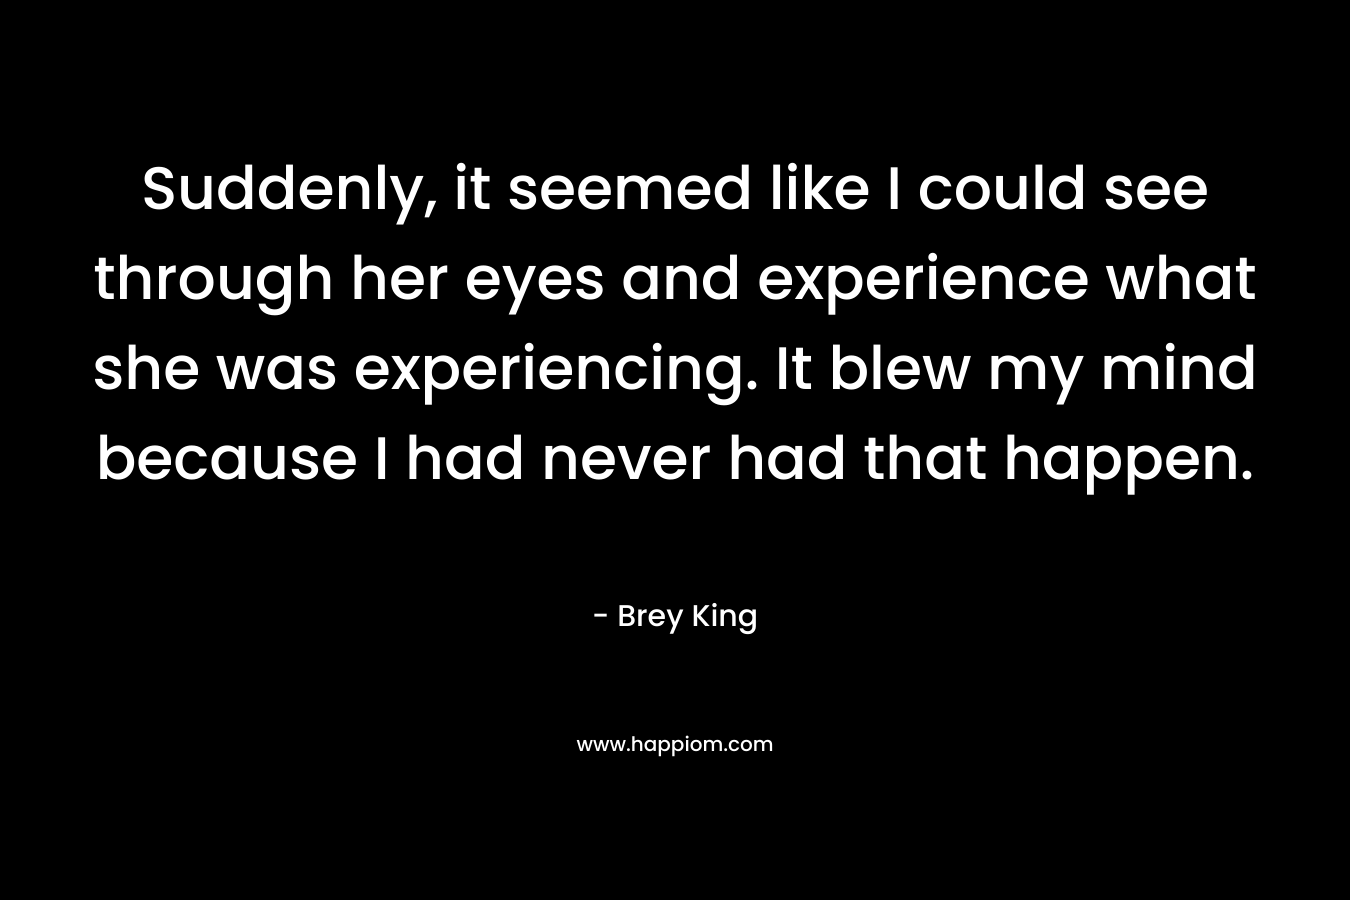 Suddenly, it seemed like I could see through her eyes and experience what she was experiencing. It blew my mind because I had never had that happen. – Brey King